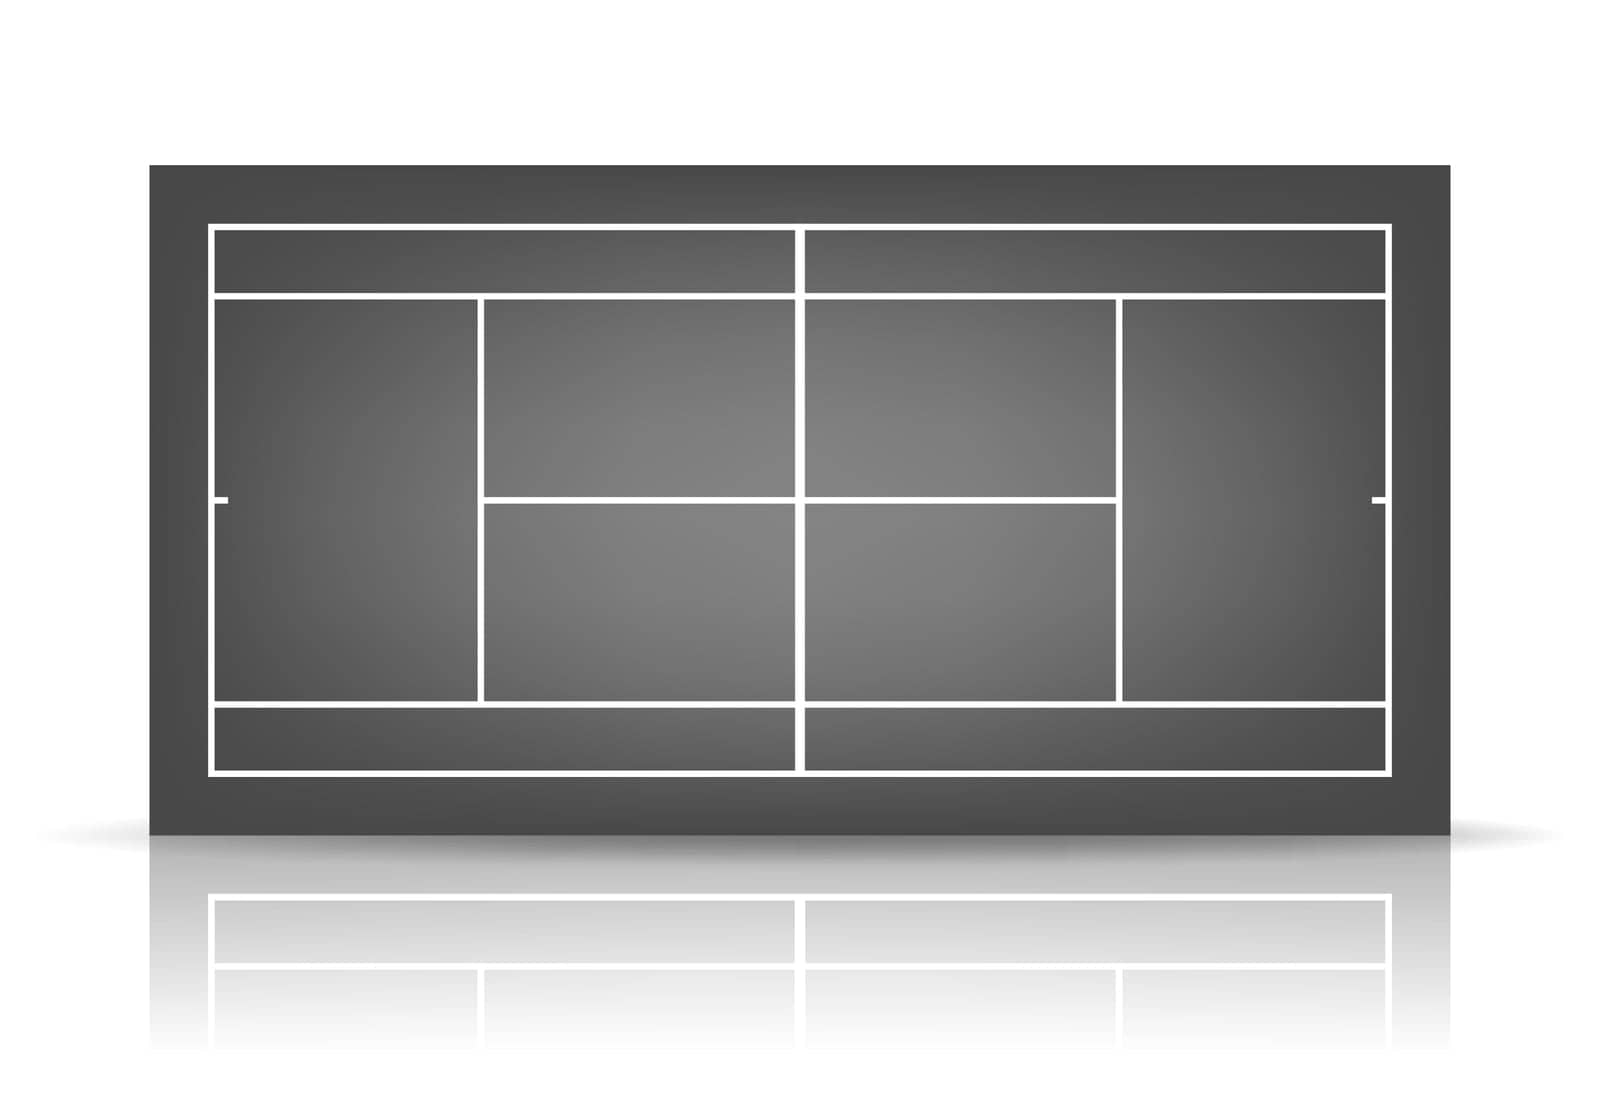 Black tennis court with reflection. Vector EPS10 illustration.